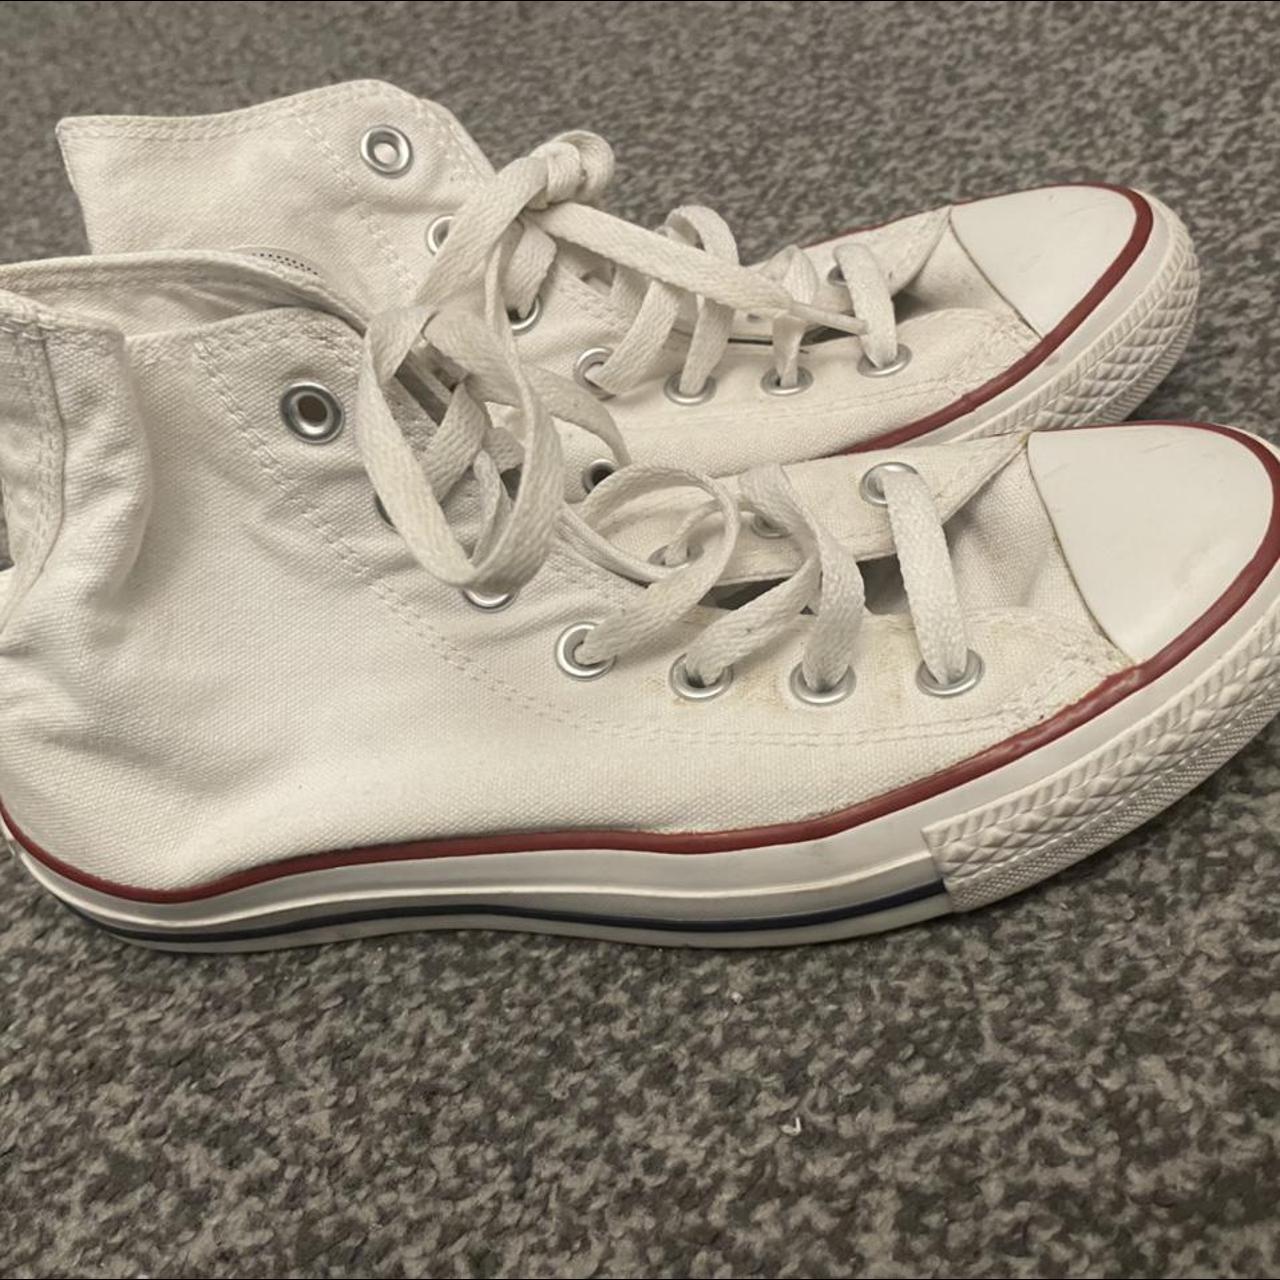 Ti smag Kvittering Converse All Star Trainers Size 5 Good Condition... - Depop